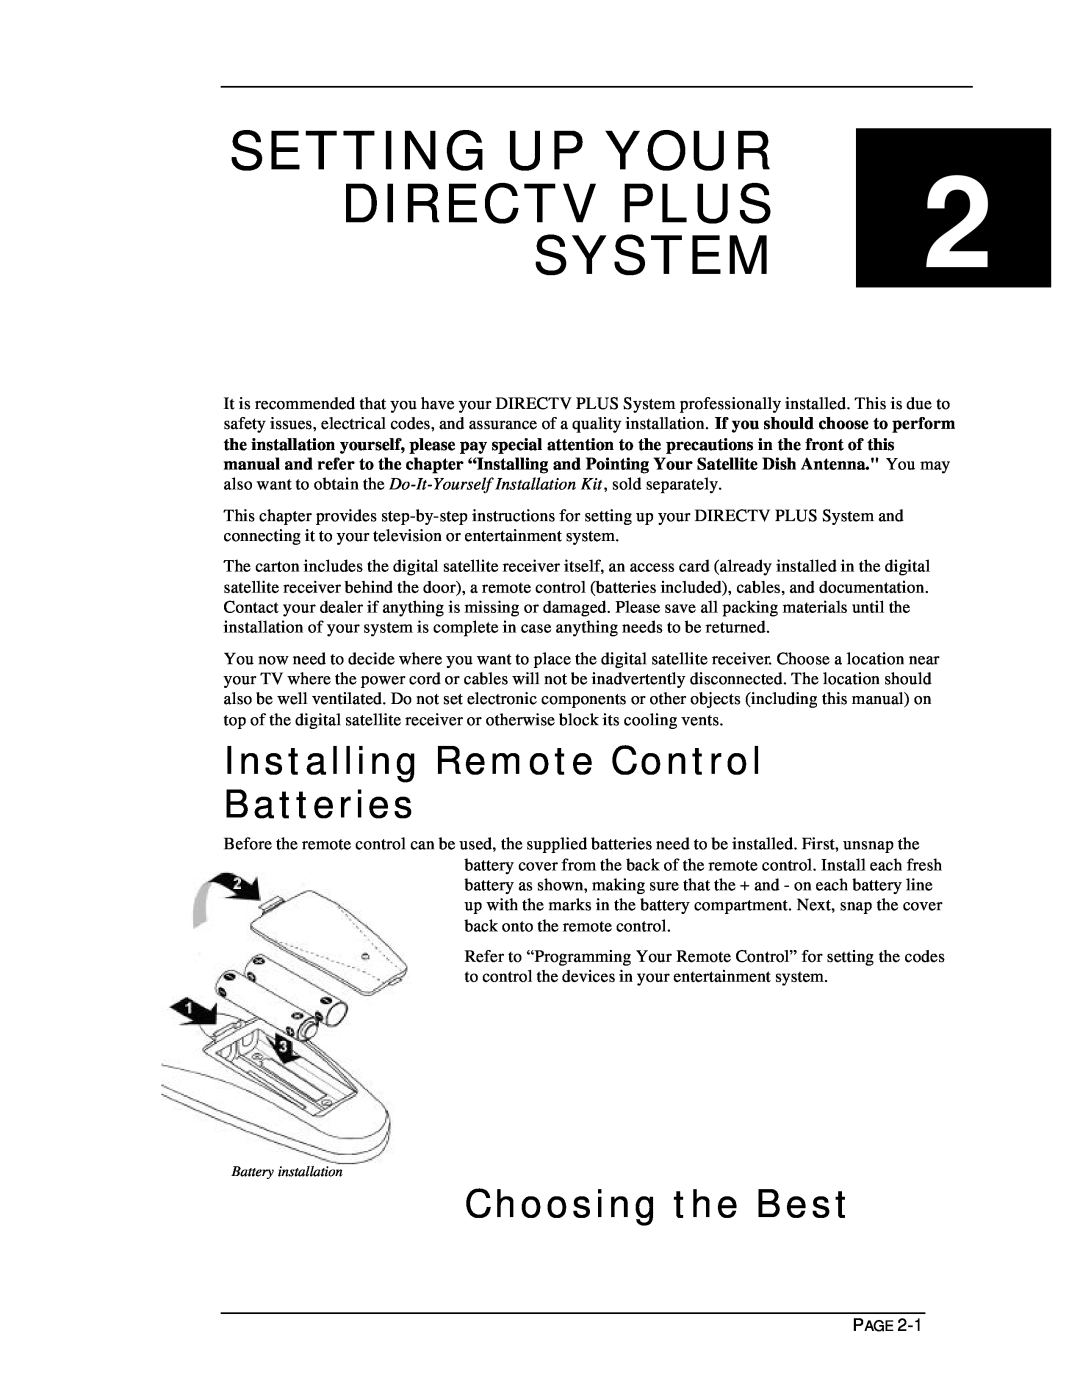 DirecTV HIRD-E11, HIRD-E25 Setting Up Your Directv Plus System, Installing Remote Control Batteries, Choosing the Best 